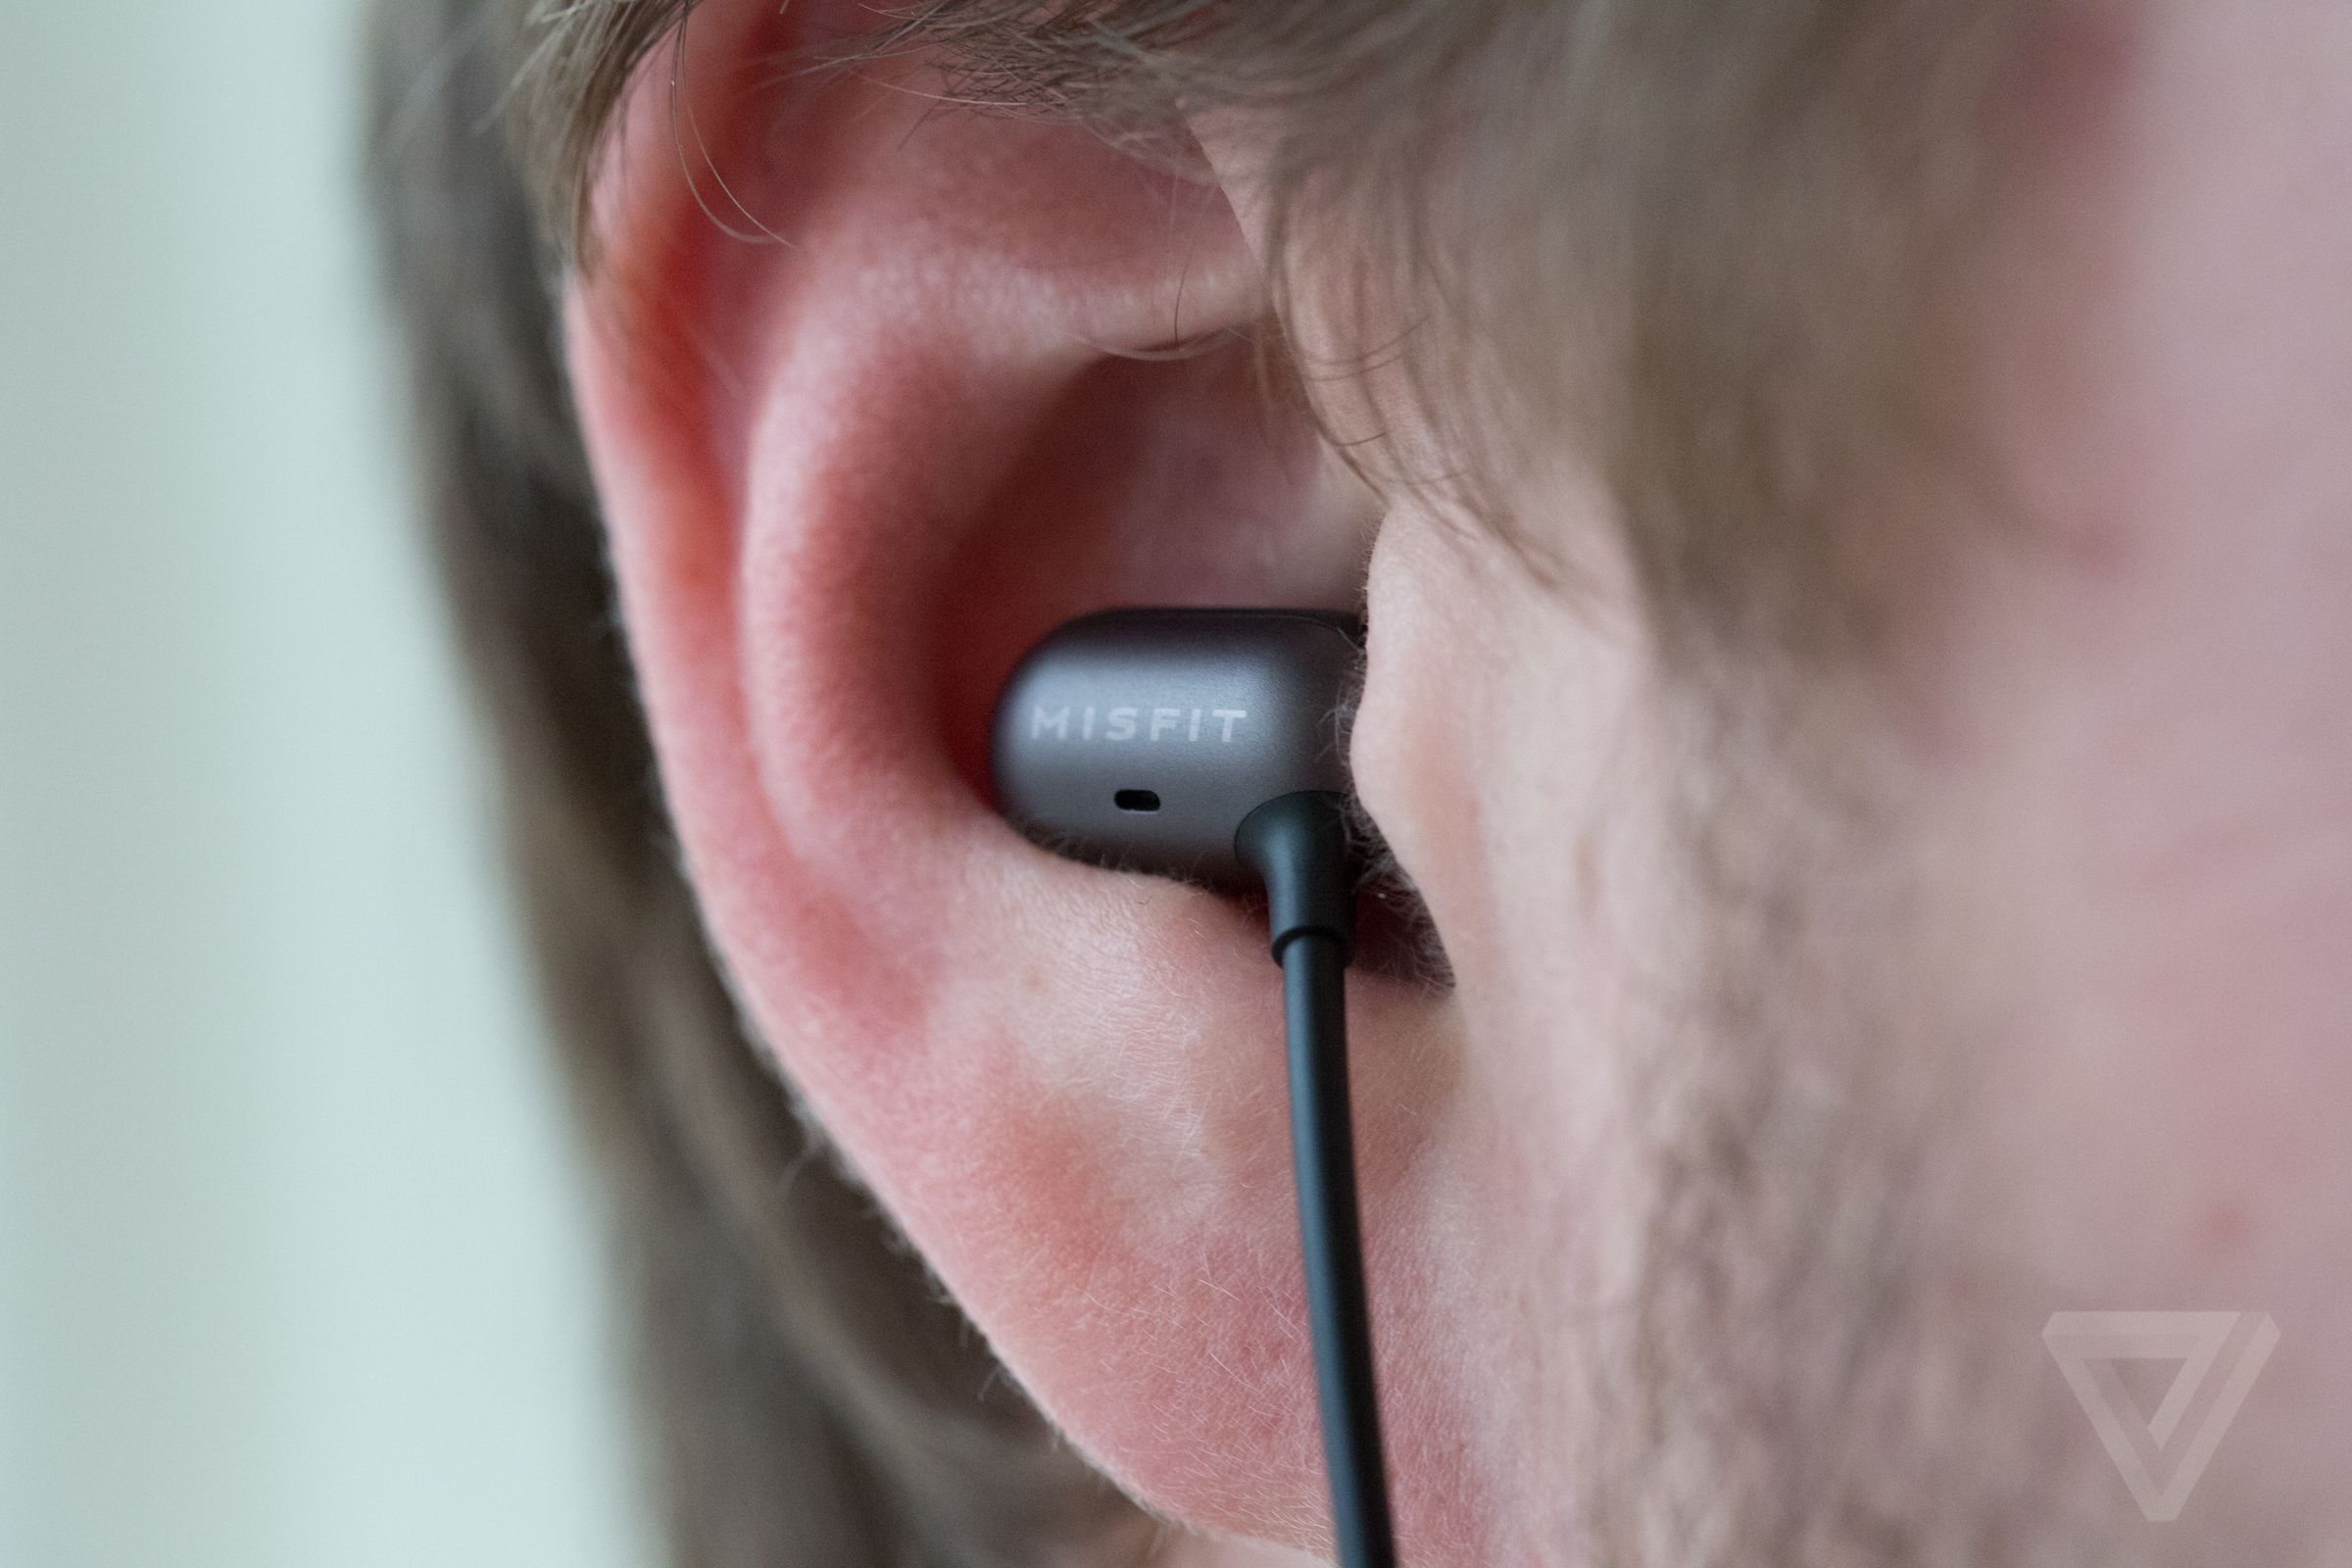 A stock image of earbuds — not the prototype itself. 